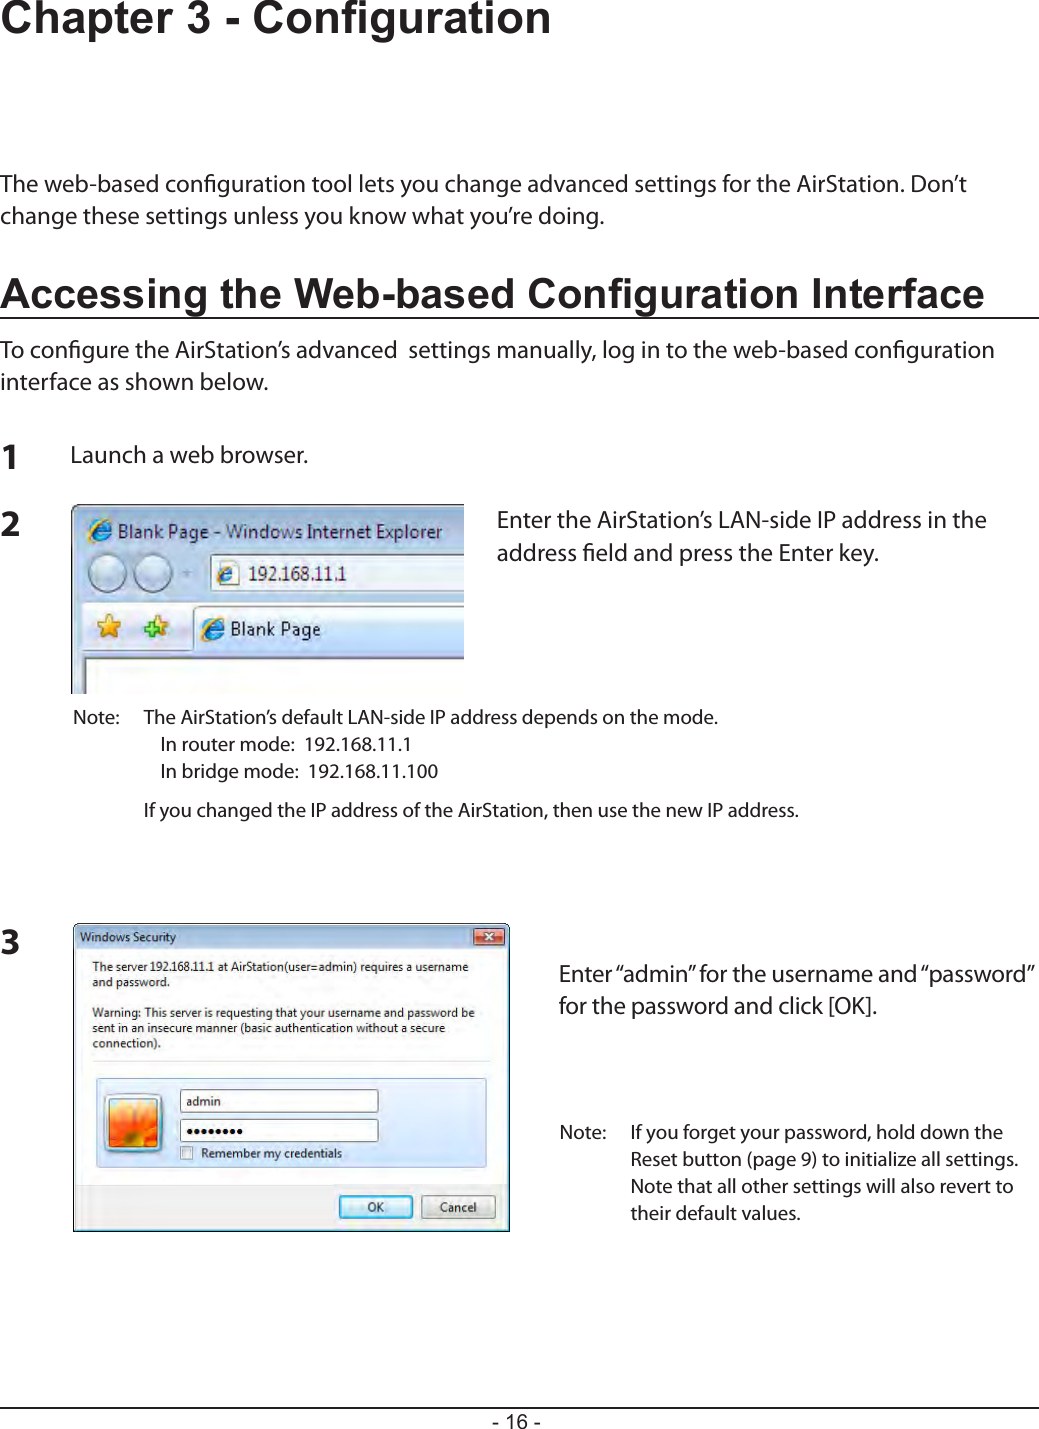 - 16 -Chapter 3 - CongurationThe web-based conguration tool lets you change advanced settings for the AirStation. Don’t change these settings unless you know what you’re doing.Accessing the Web-based Conguration InterfaceTo congure the AirStation’s advanced  settings manually, log in to the web-based conguration interface as shown below.123Launch a web browser.Enter the AirStation’s LAN-side IP address in the address eld and press the Enter key.Note:  The AirStation’s default LAN-side IP address depends on the mode.   In router mode:  192.168.11.1   In bridge mode:  192.168.11.100  If you changed the IP address of the AirStation, then use the new IP address.Enter “admin” for the username and “password”for the password and click [OK].Note:  If you forget your password, hold down the Reset button (page 9) to initialize all settings. Note that all other settings will also revert to their default values.